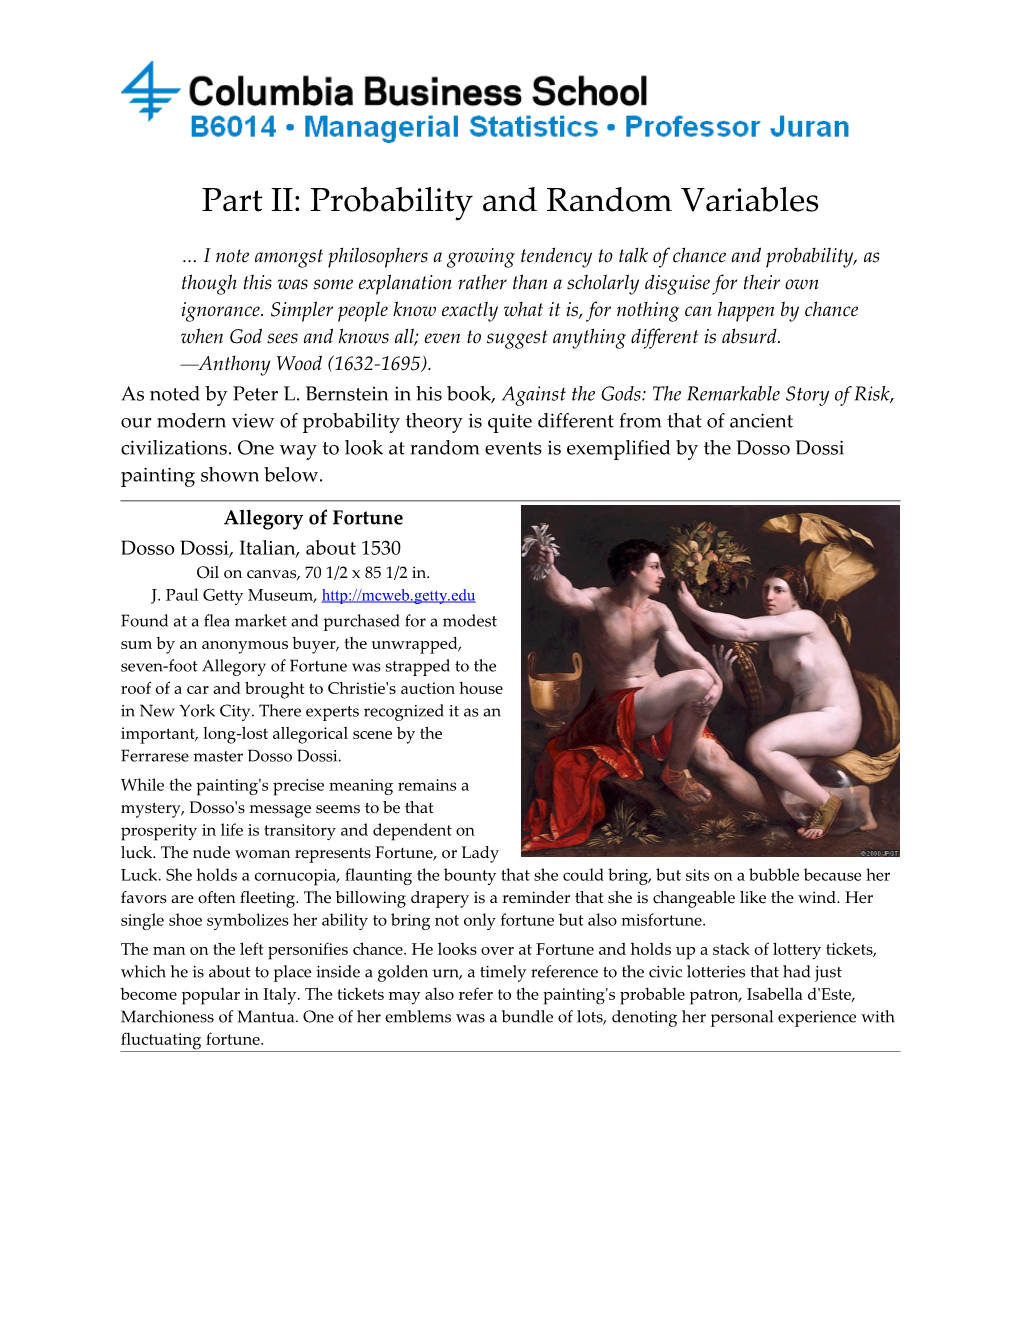 Part II: Probability and Random Variables